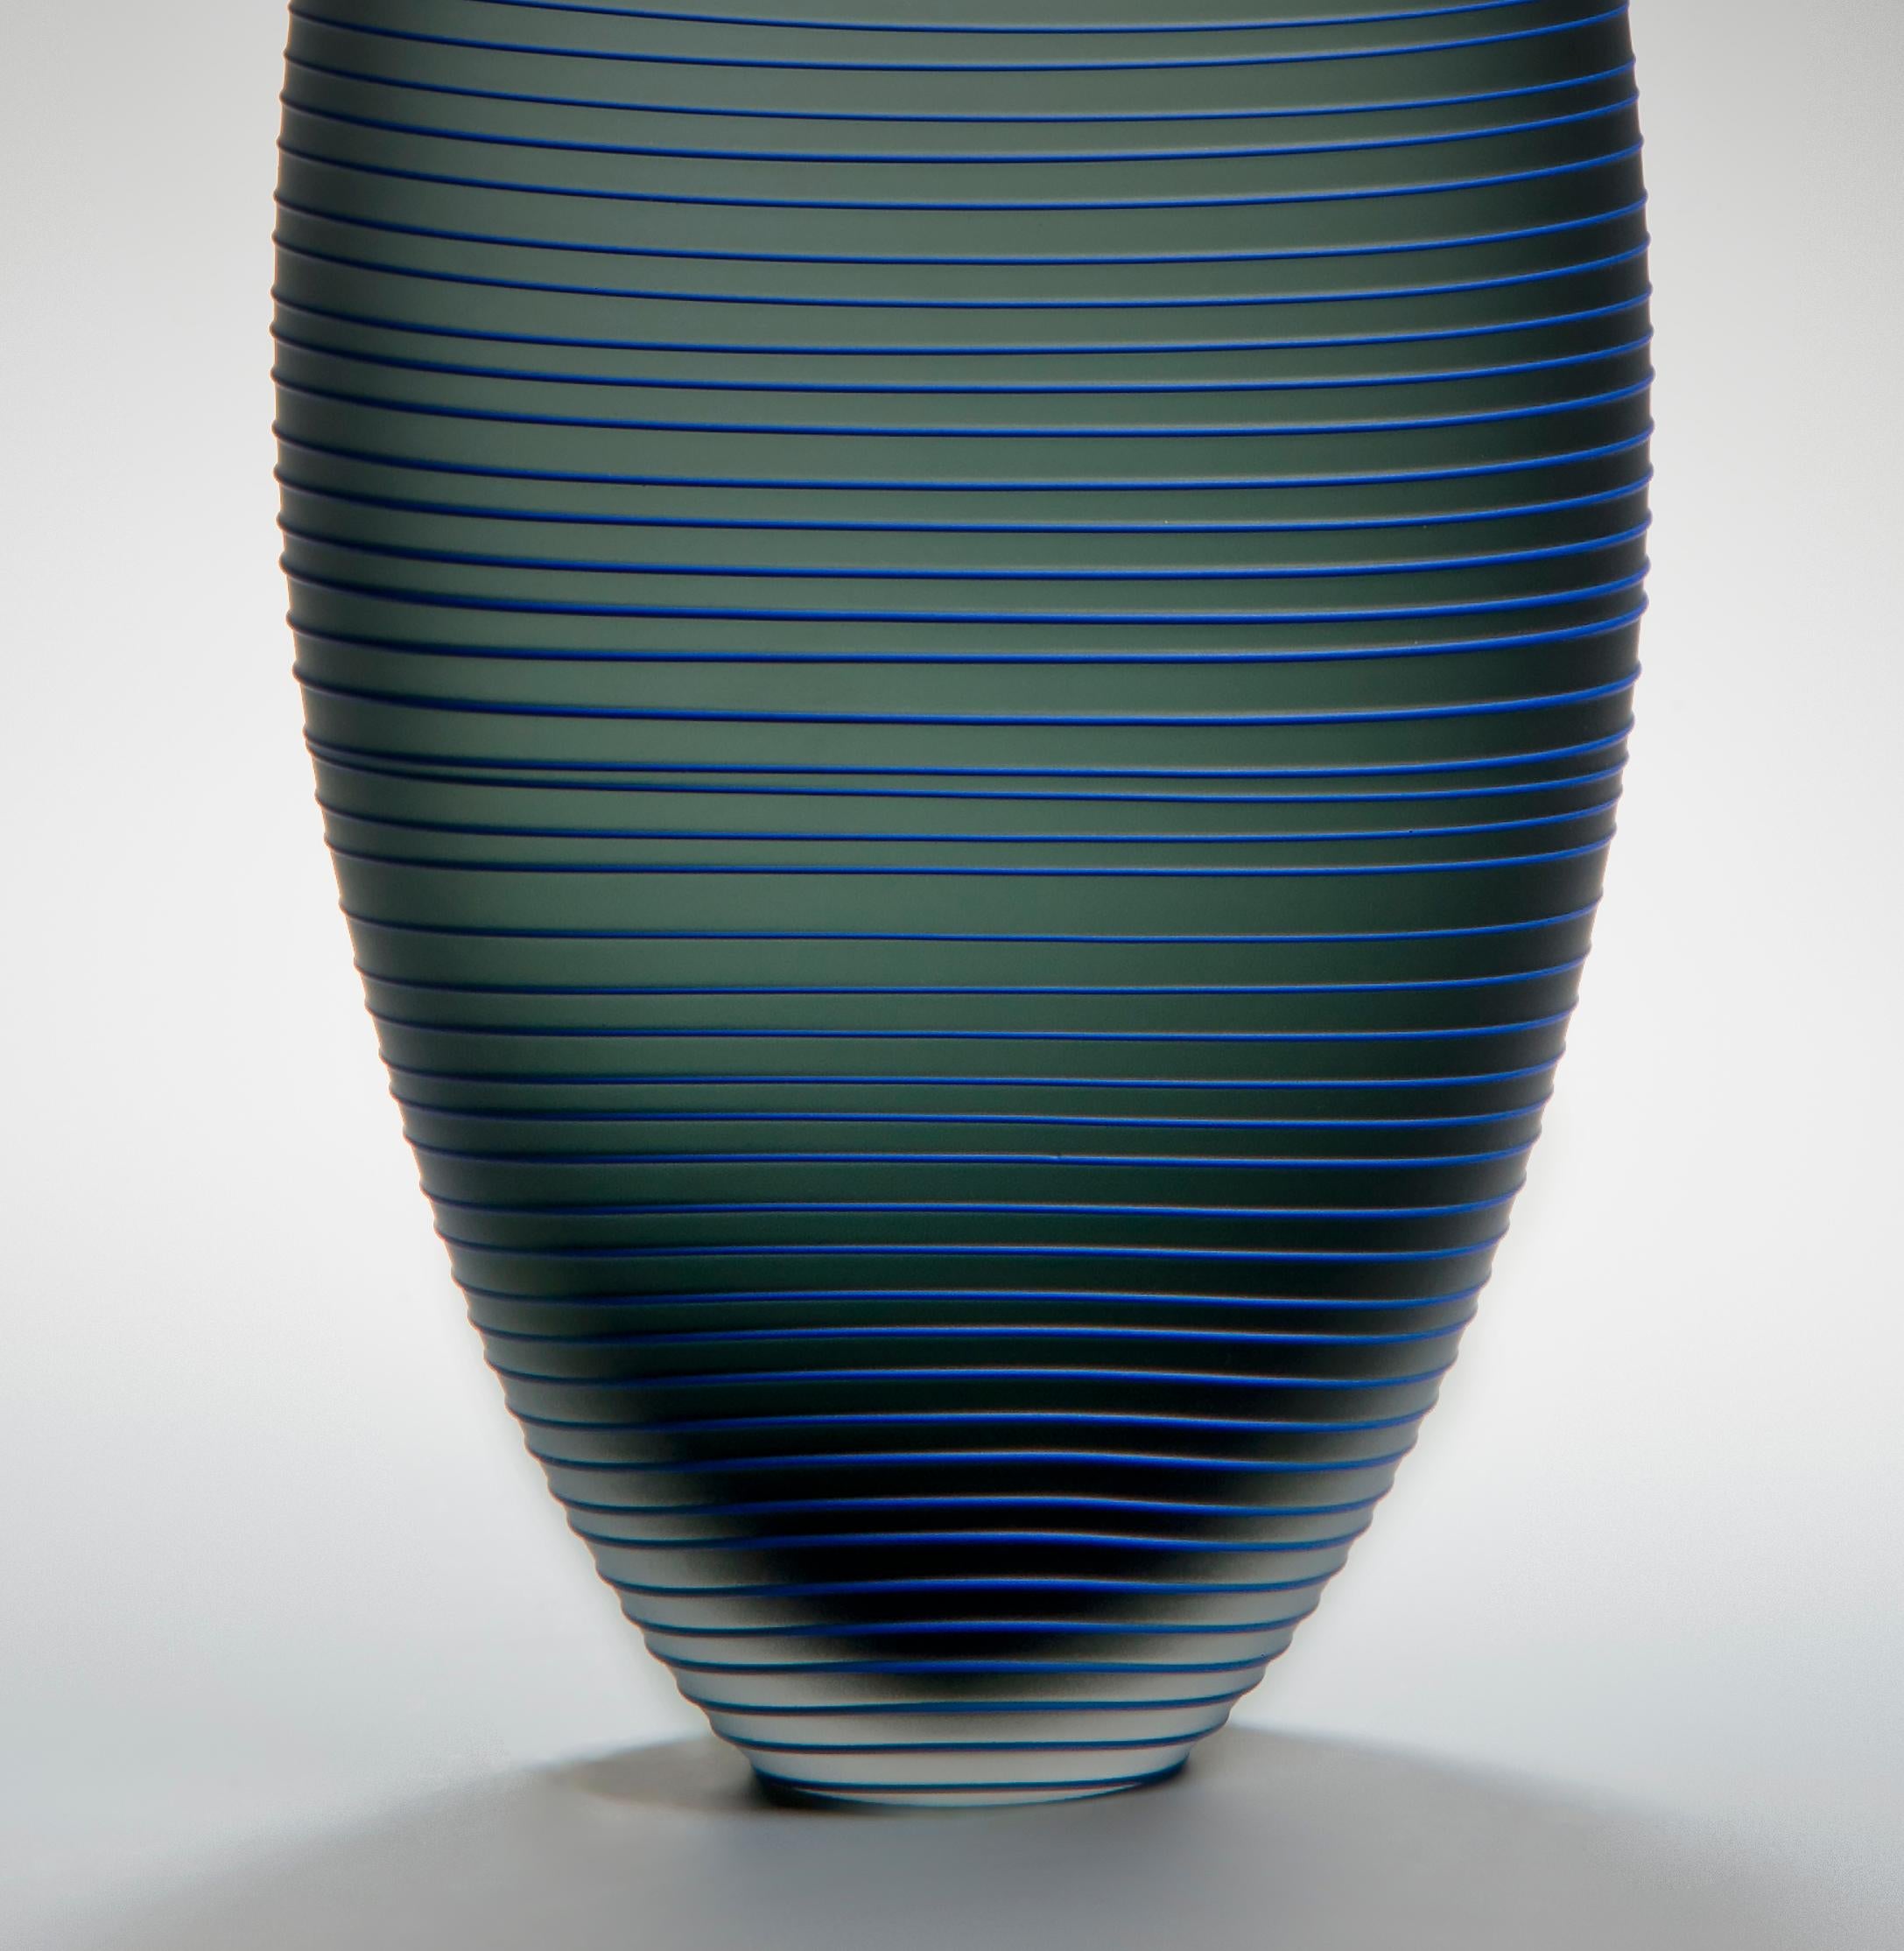 Hand-Crafted Tonal Frequency Vase in Grey, a unique glass vase in grey & blue by Liam Reeves